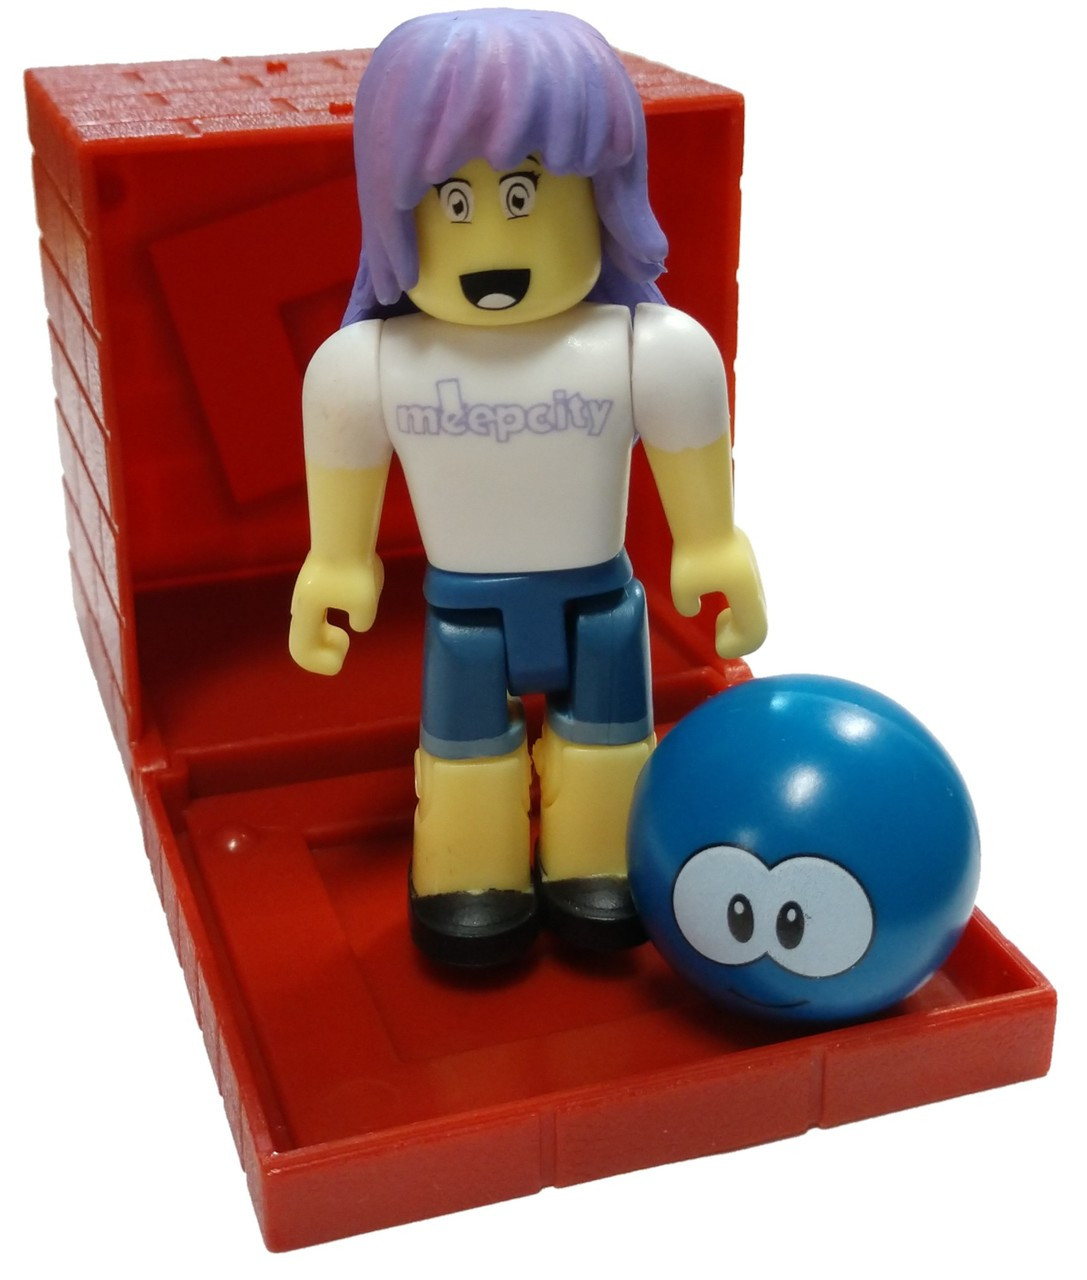 Roblox Red Series 4 Meepcity Pet Seller 3 Mini Figure With Red Cube And Online Code Loose Jazwares Toywiz - meep city fnaf party with code roblox